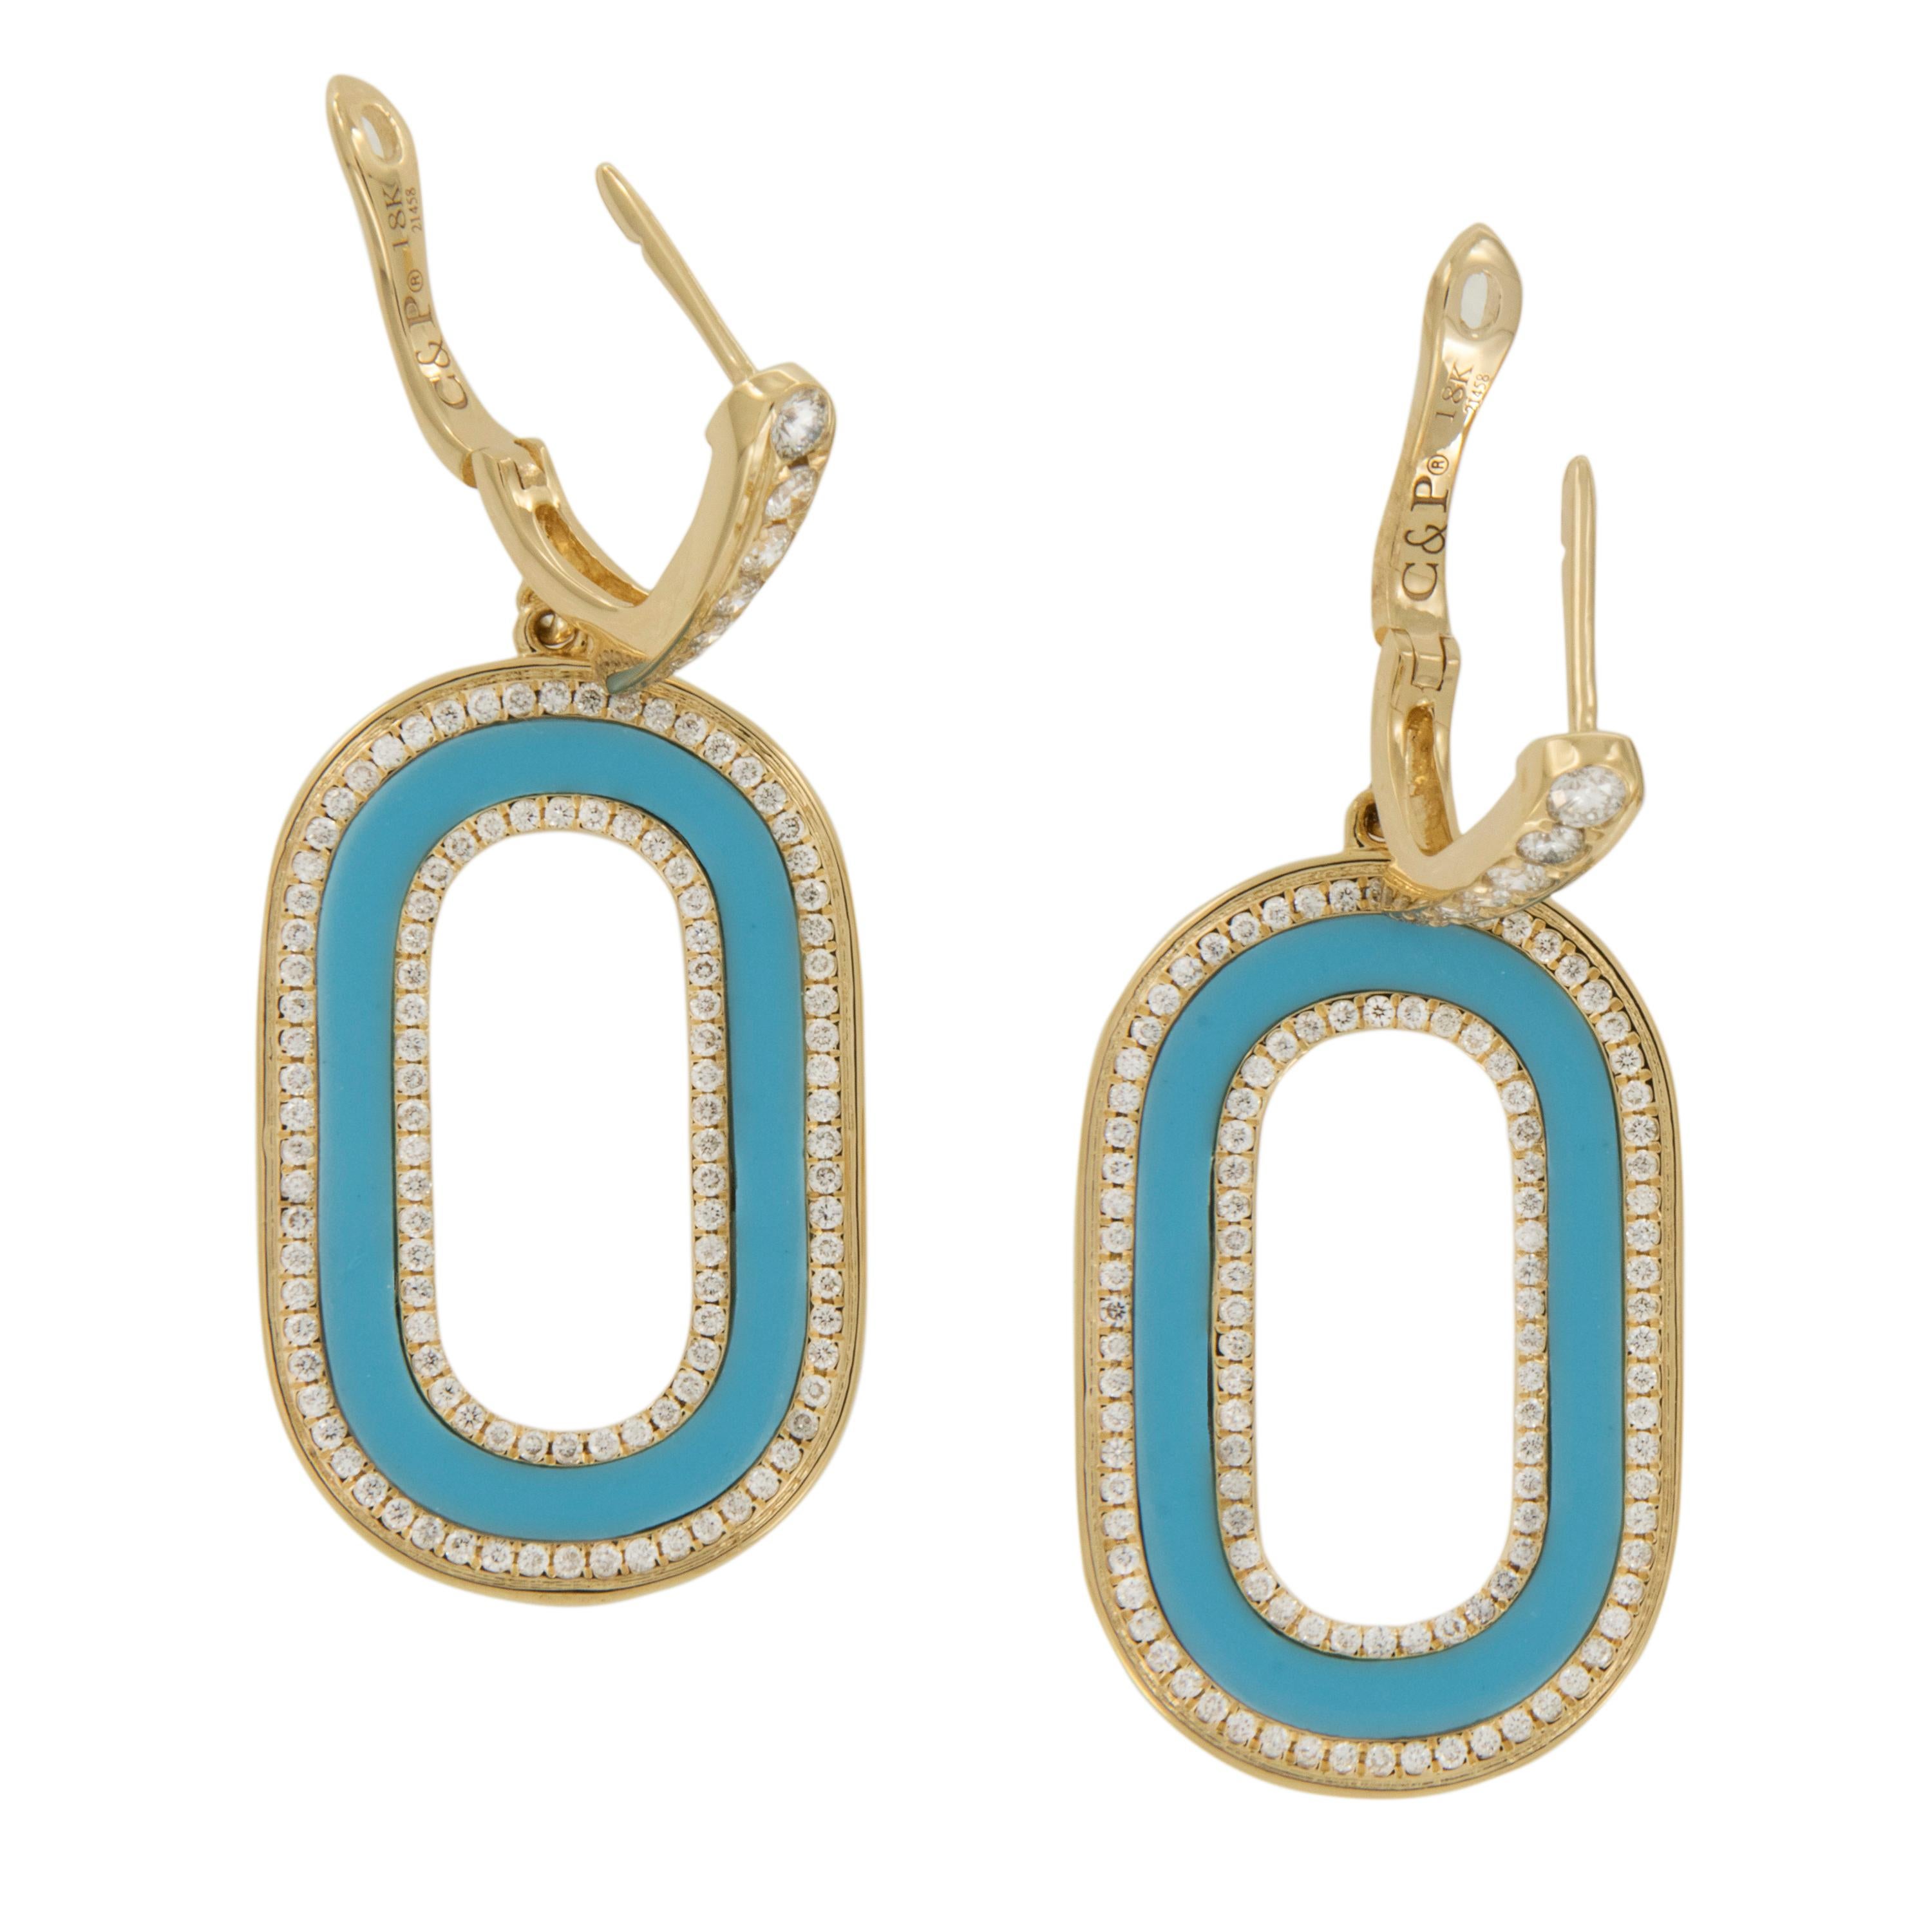 People the world over have revered turquoise as a good luck stone for centuries. Bring yourself some luck with these royal 18 karat yellow gold 